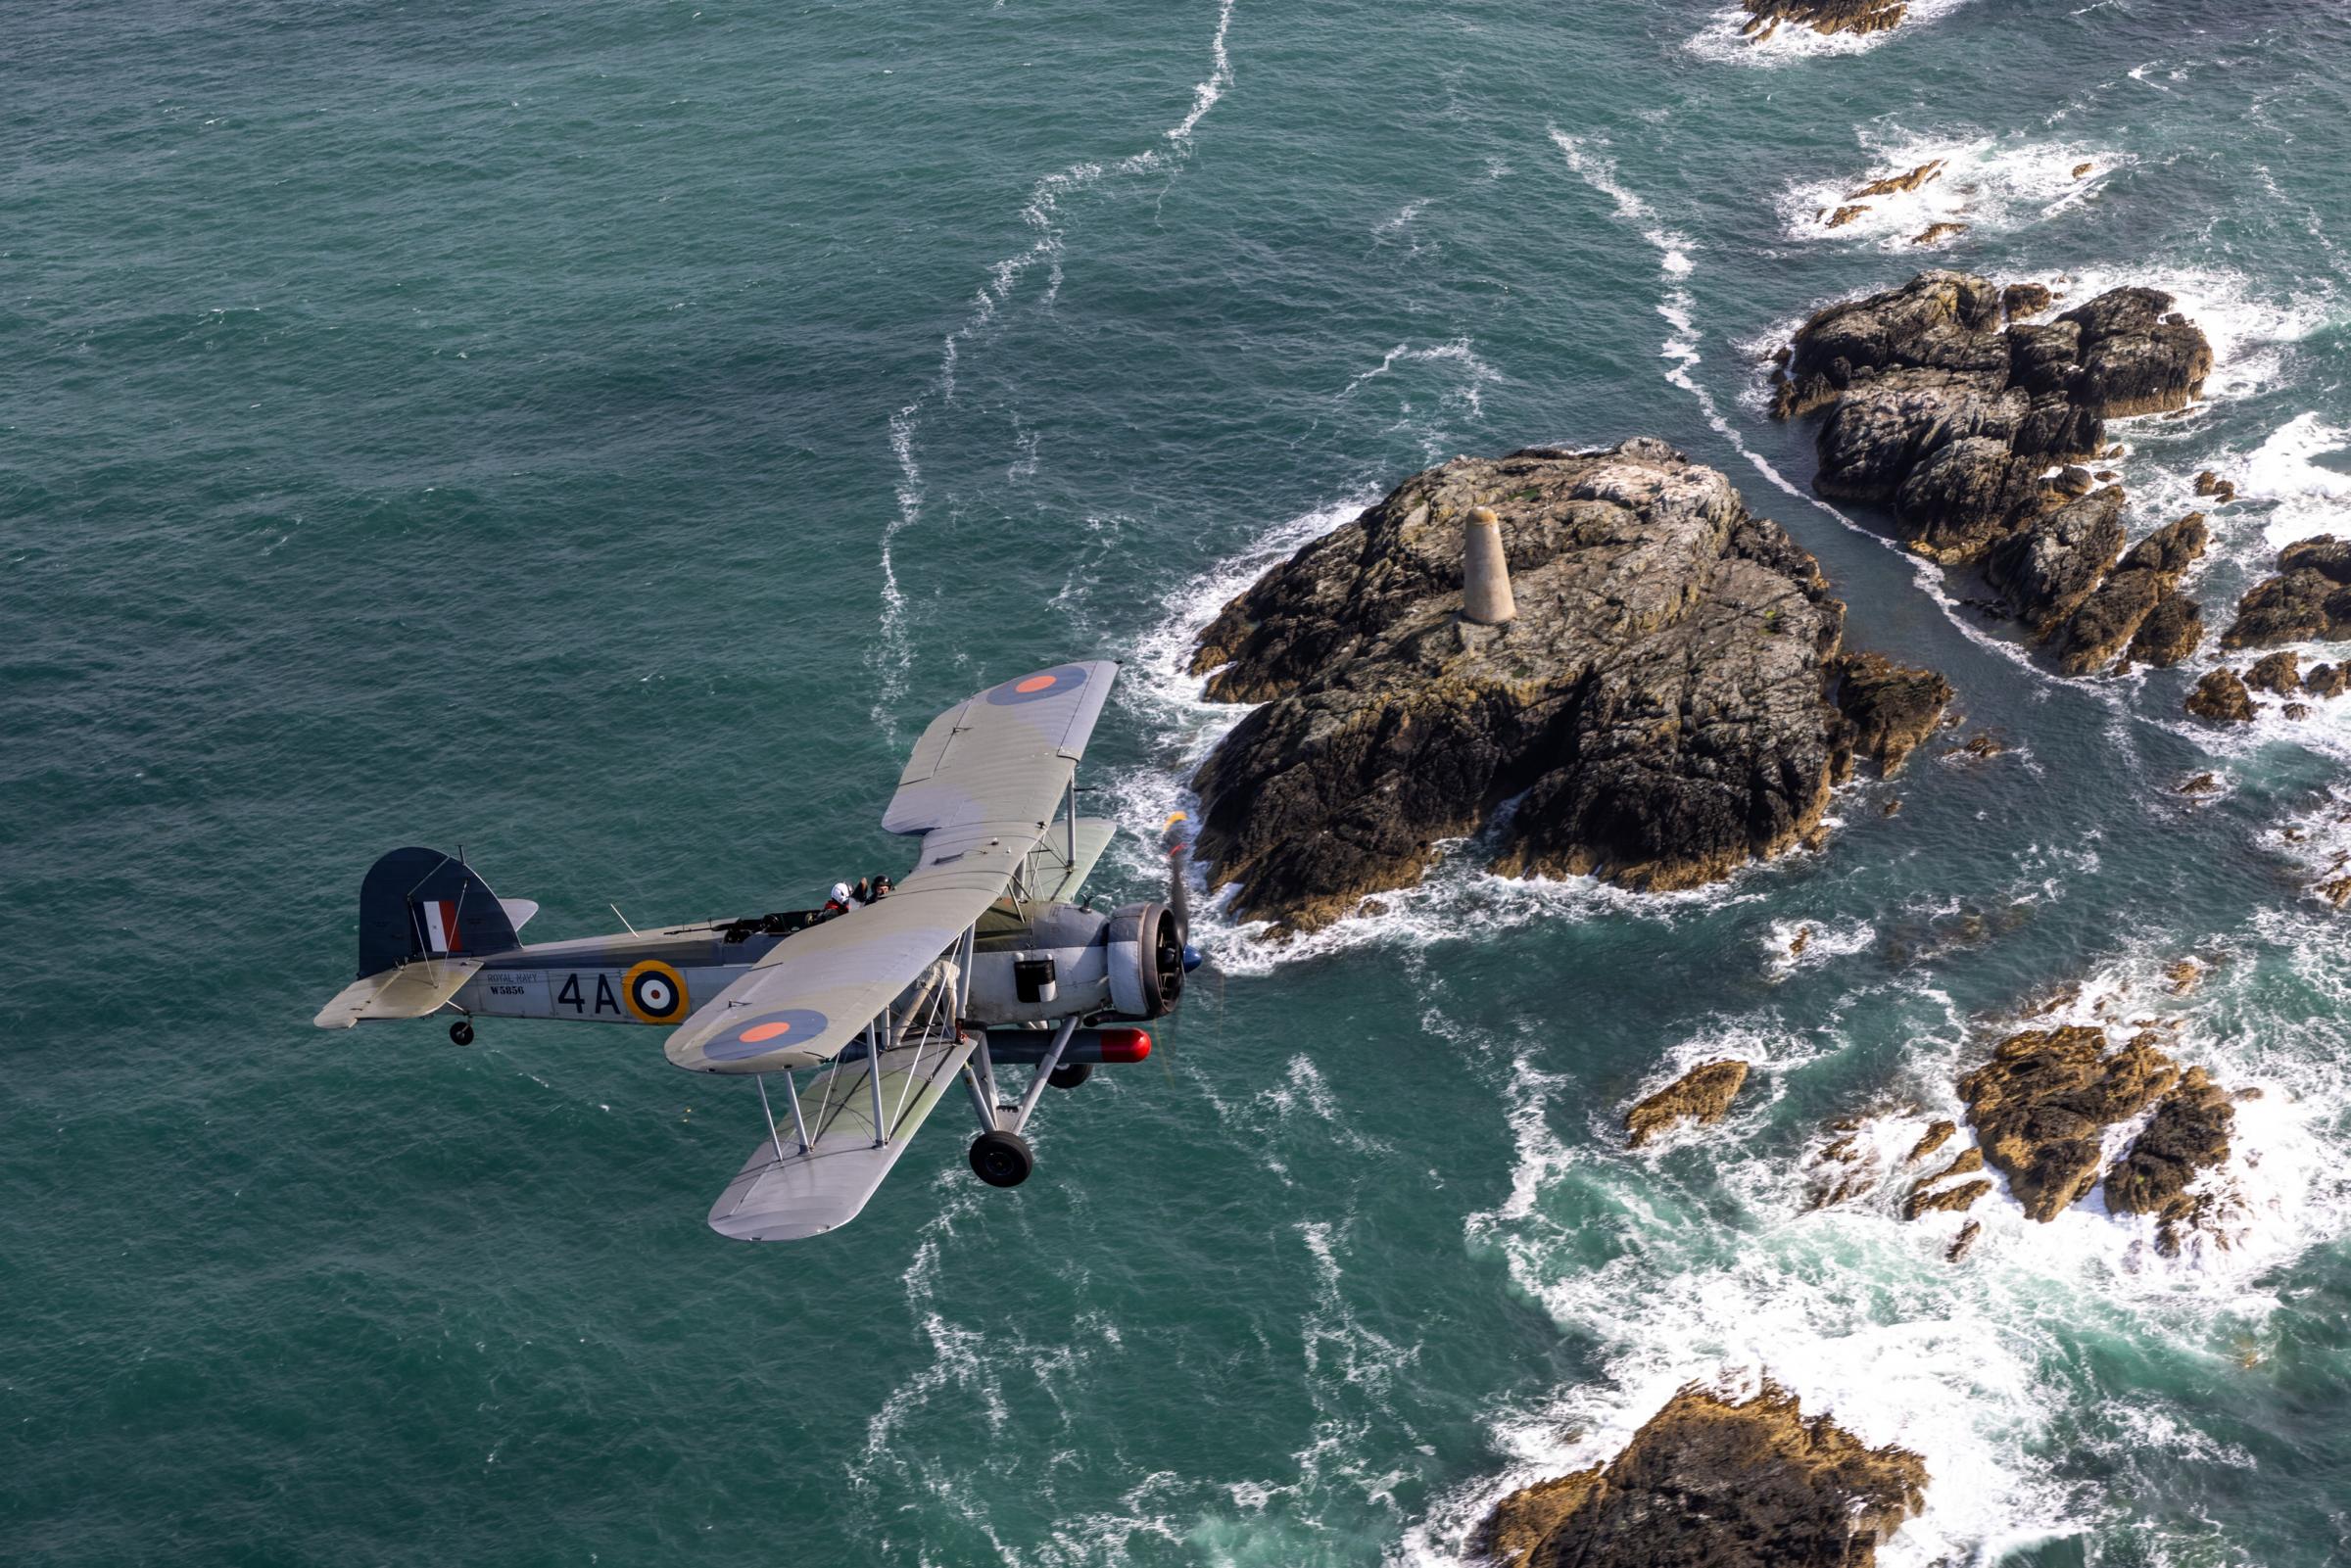 Incredible pictures captured on Friday (11 Aug) show the Navy Wings Swordfish Warbird airplane, W5856, as it participated in the annual RAF Valley Families Day.